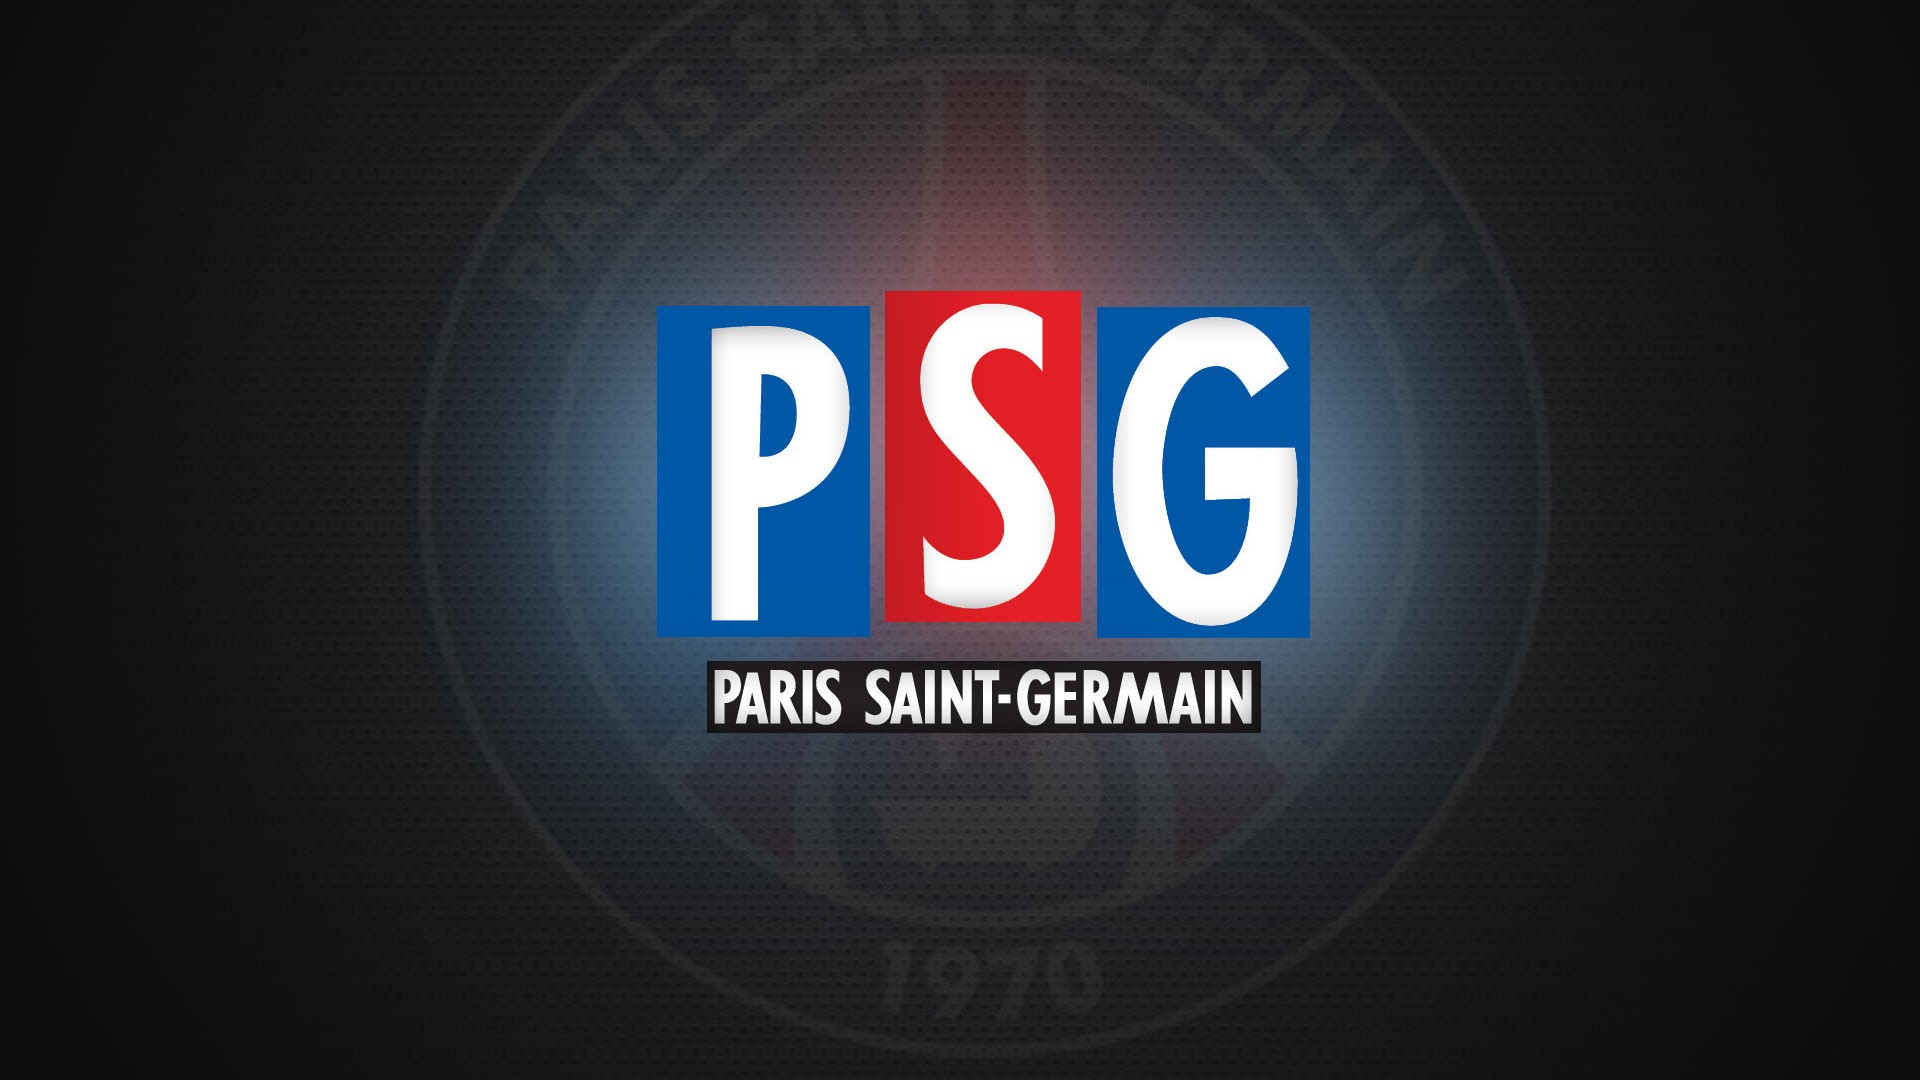 HD PSG Backgrounds With high-resolution 1920X1080 pixel. You can use this wallpaper for your Desktop Computers, Mac Screensavers, Windows Backgrounds, iPhone Wallpapers, Tablet or Android Lock screen and another Mobile device